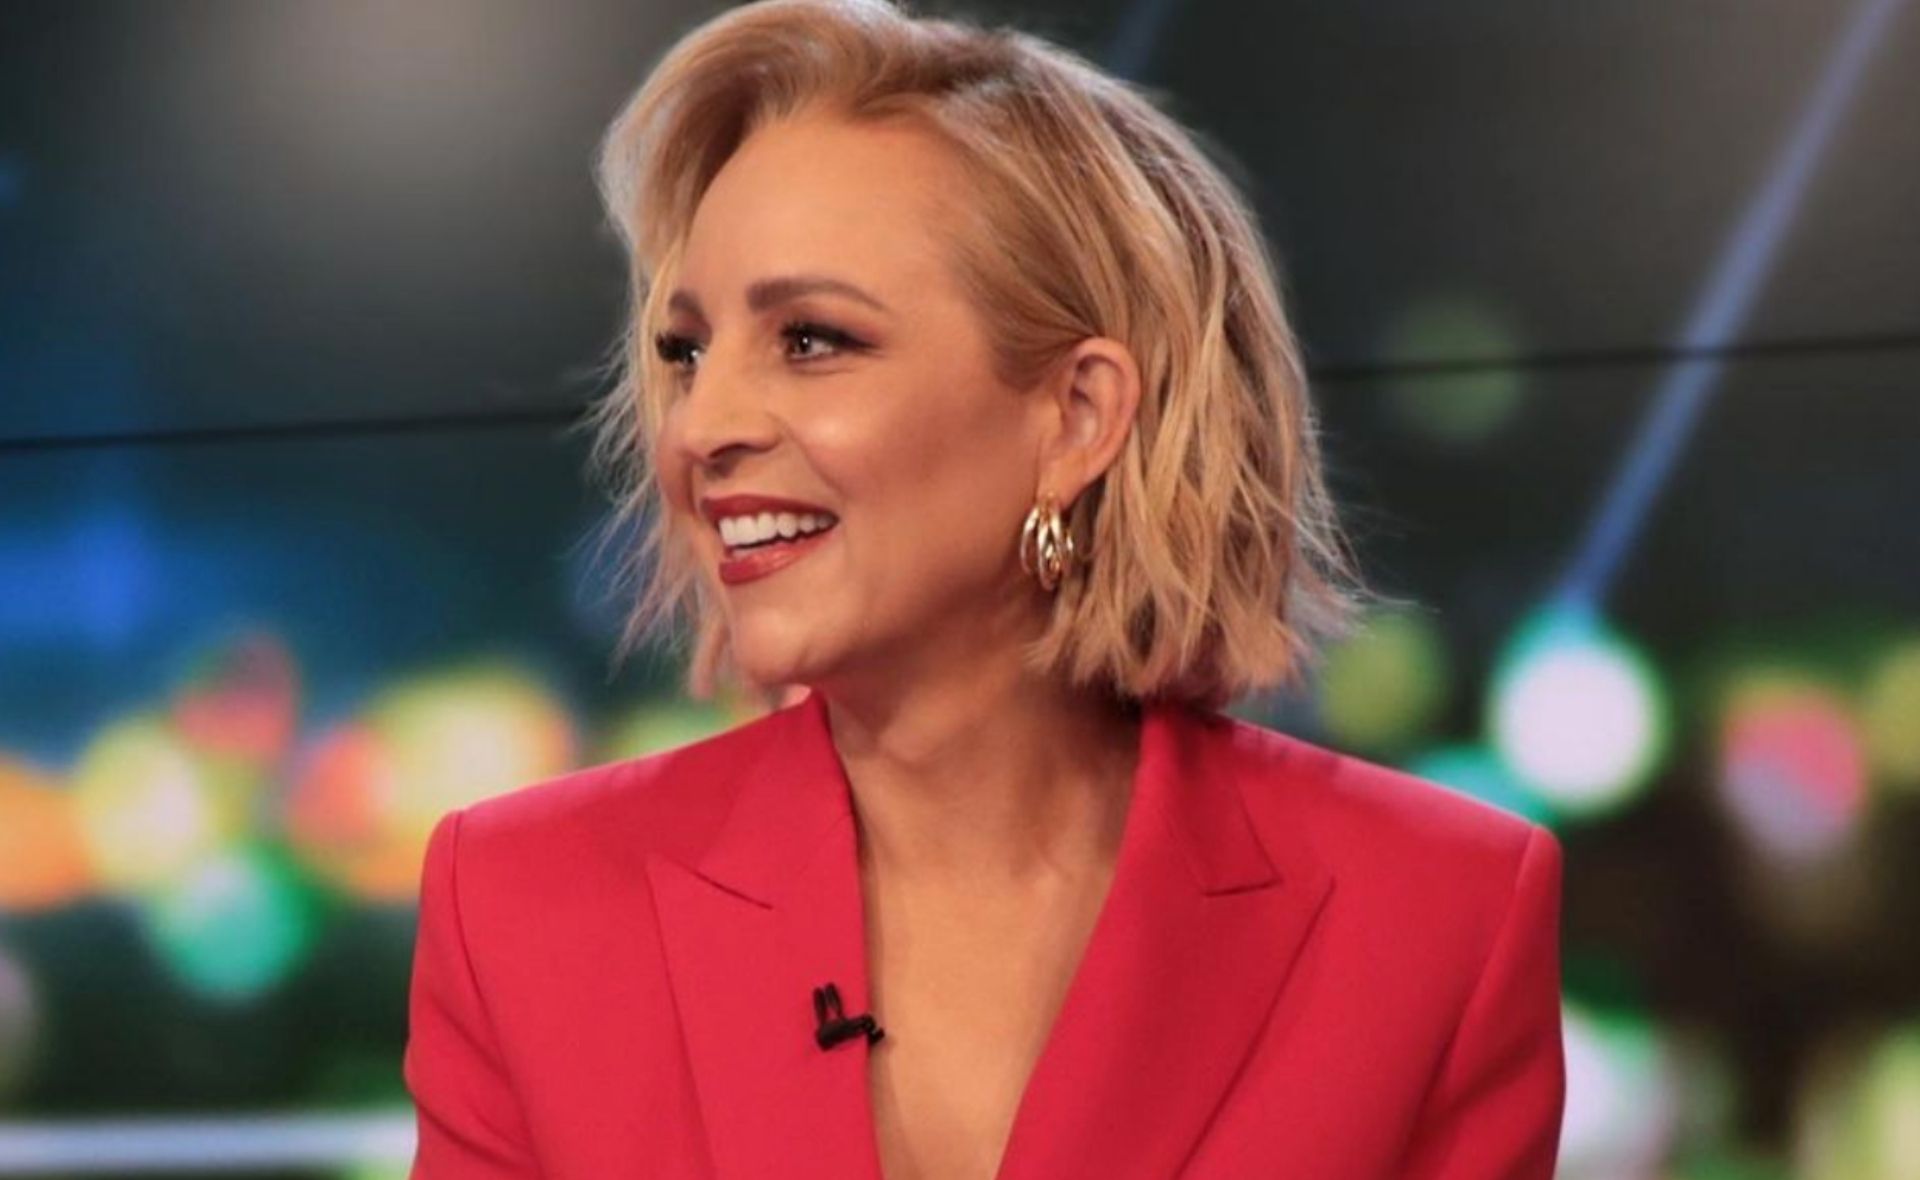 The Project shares an epic throwback of Carrie Bickmore that proves she’s always been cool